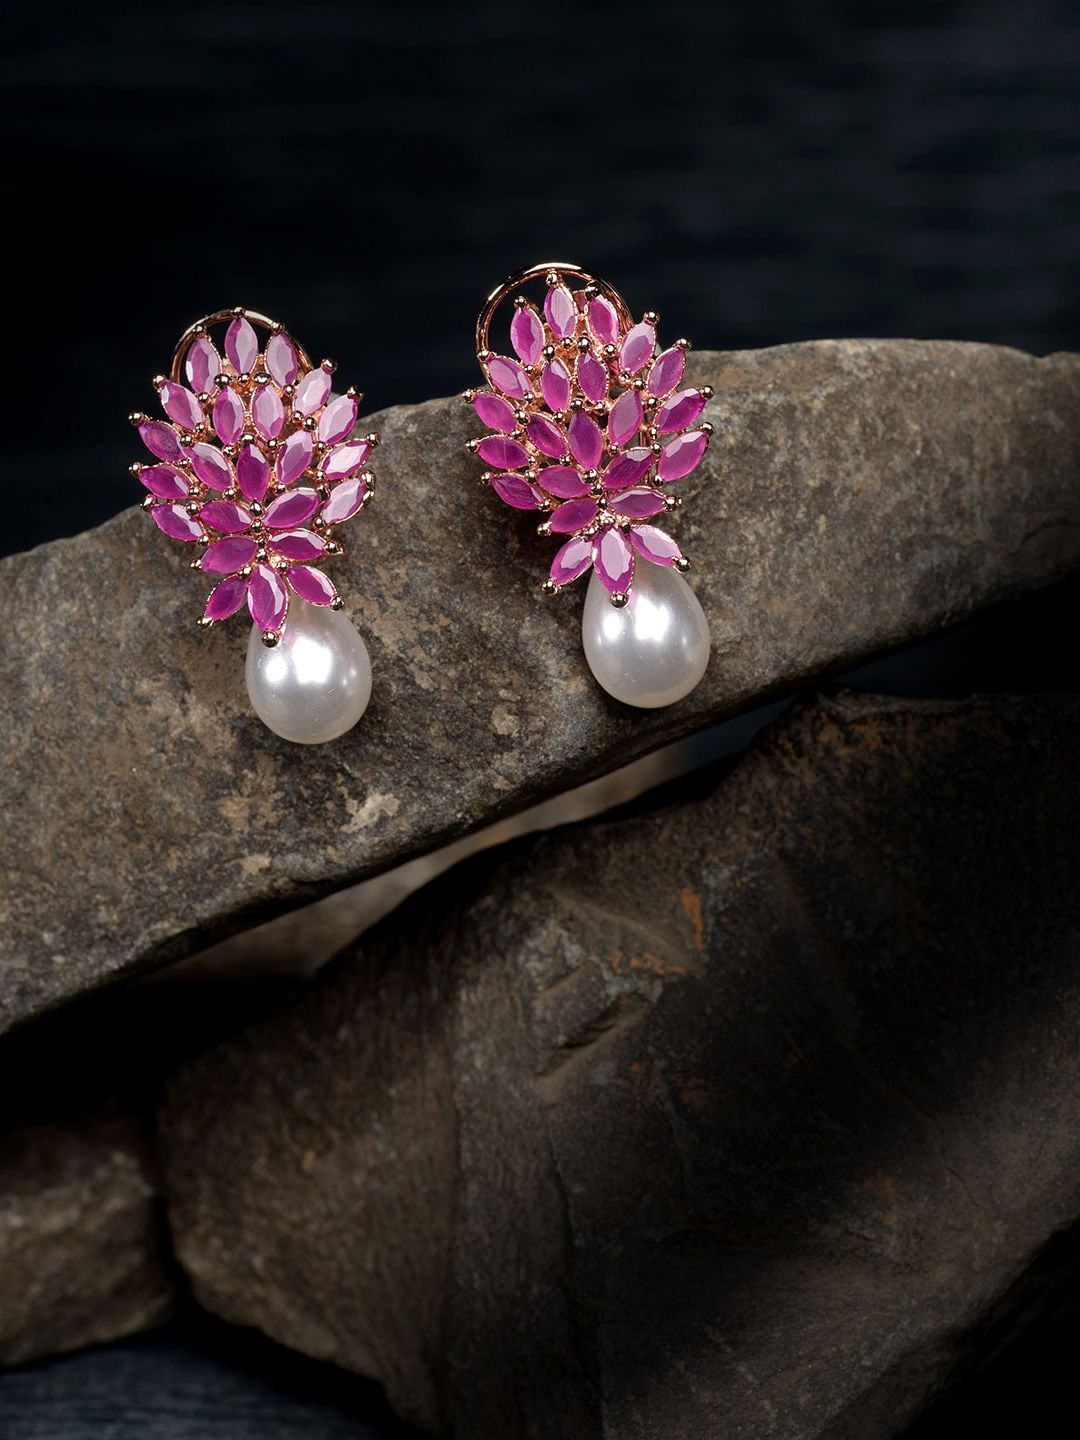 Saraf RS Jewellery Pink Contemporary Studs Earrings Price in India